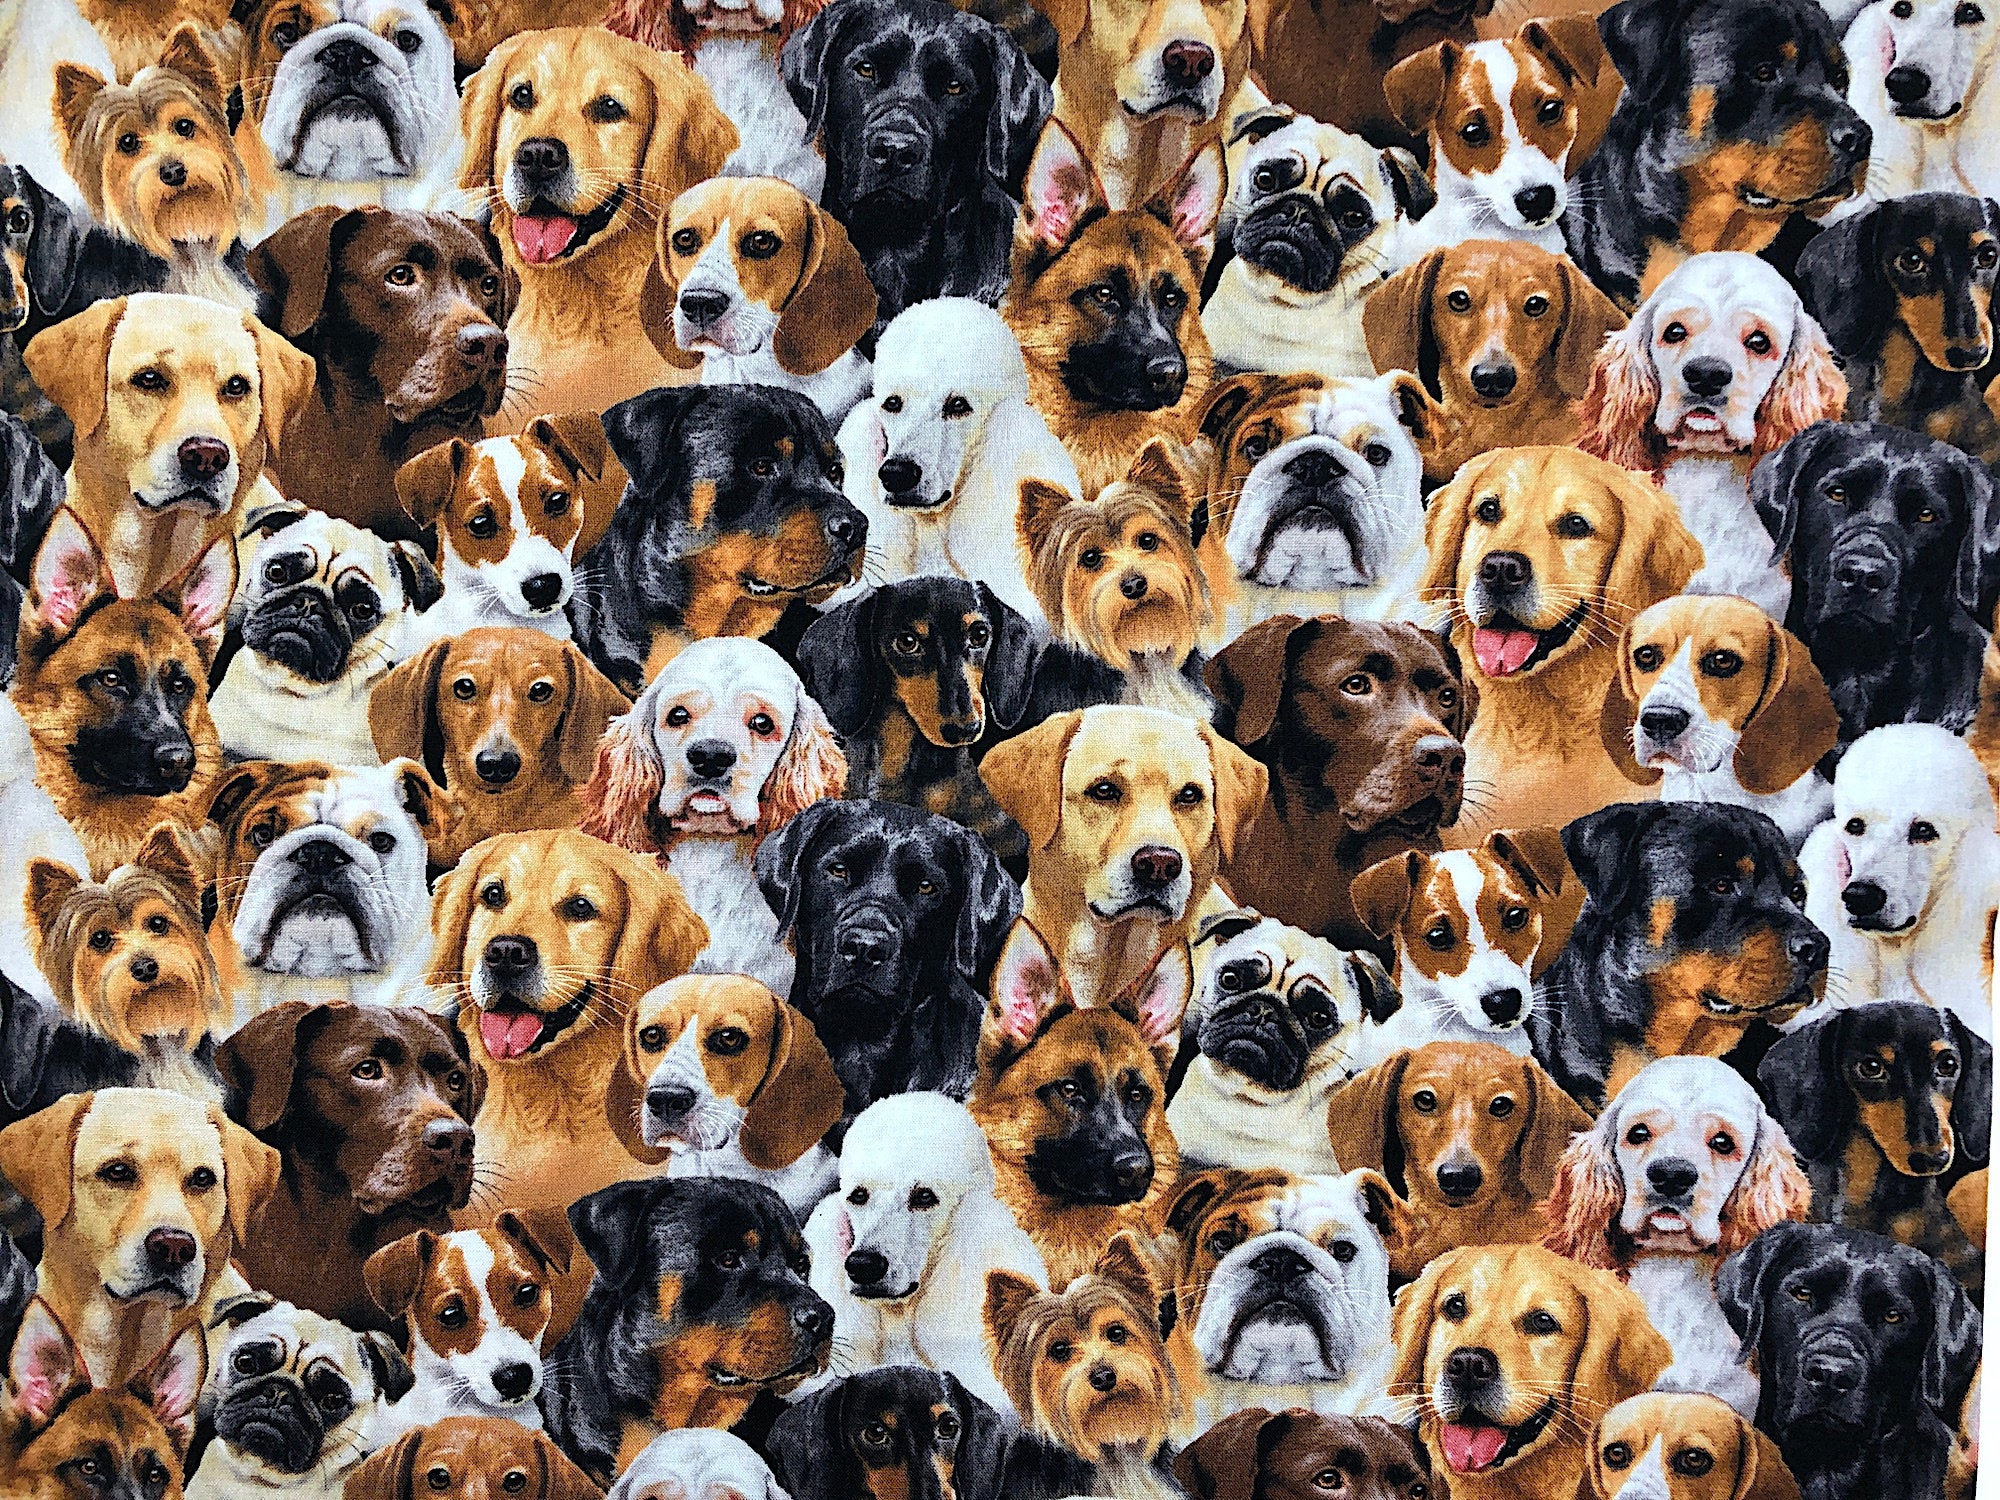 This fabric is called Dog Breeds and is covered with labs, yorkies, poodles and more dog breeds.